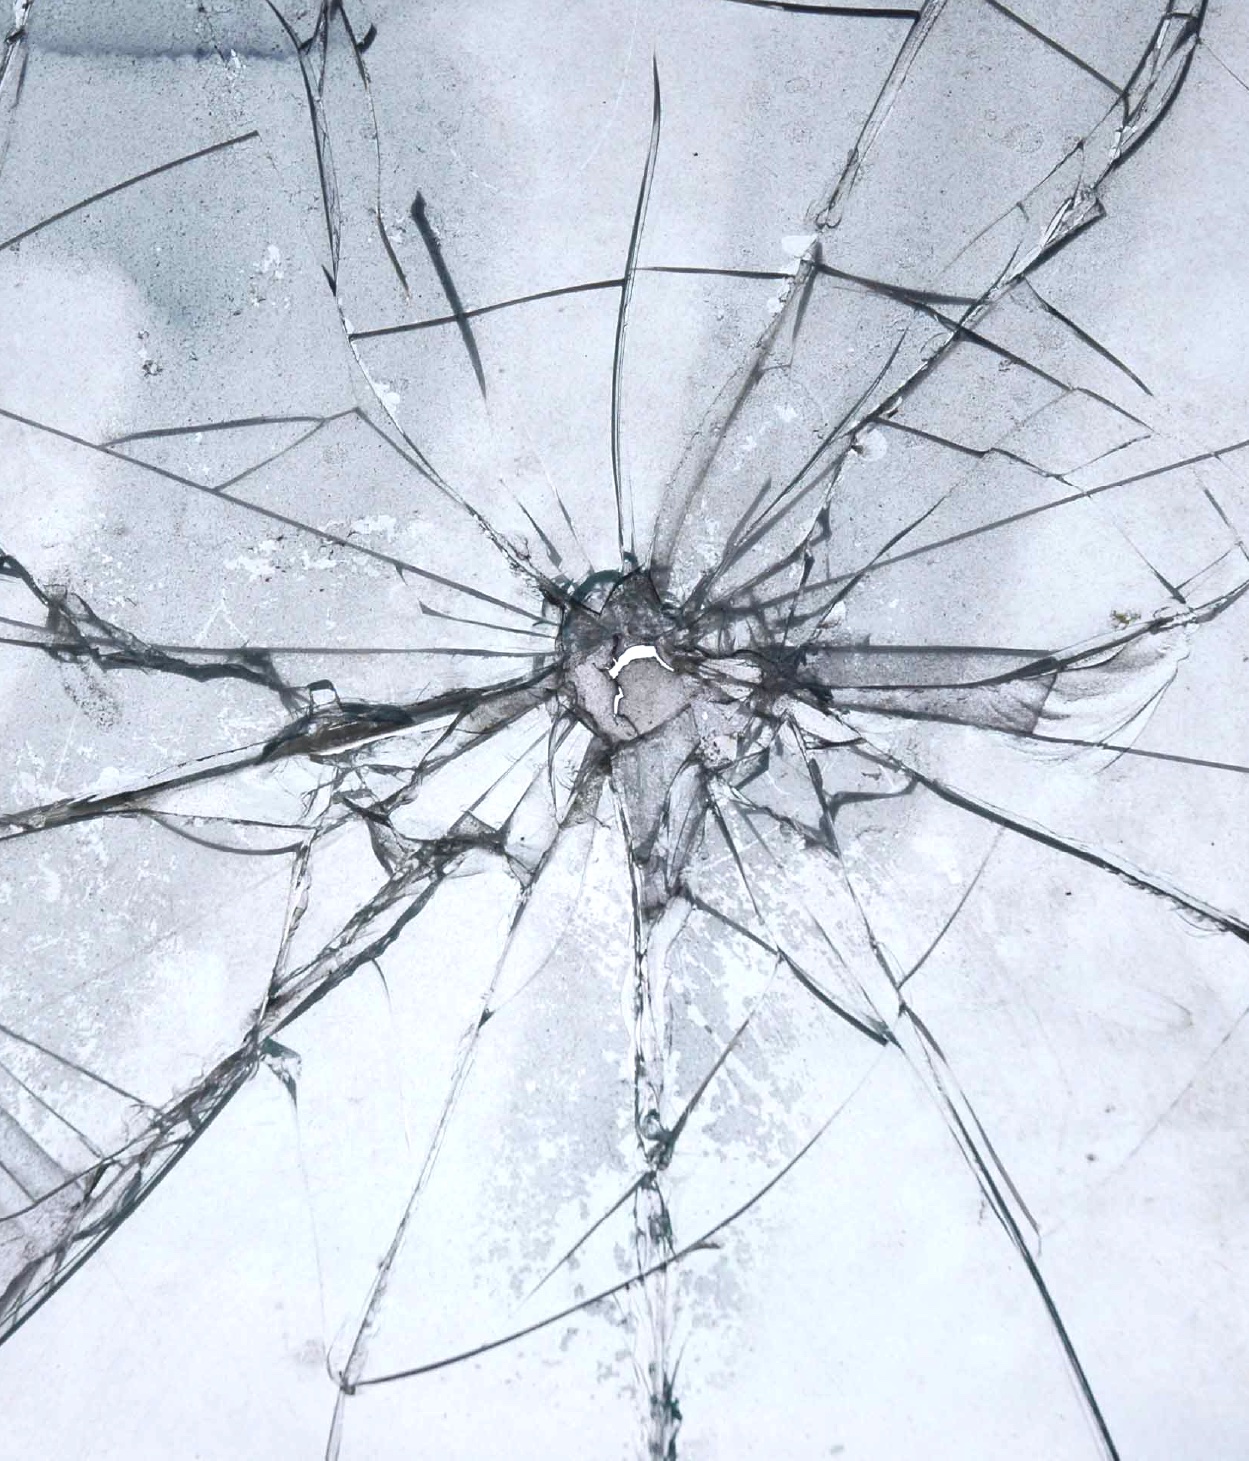 Bullet hole in cracked glass